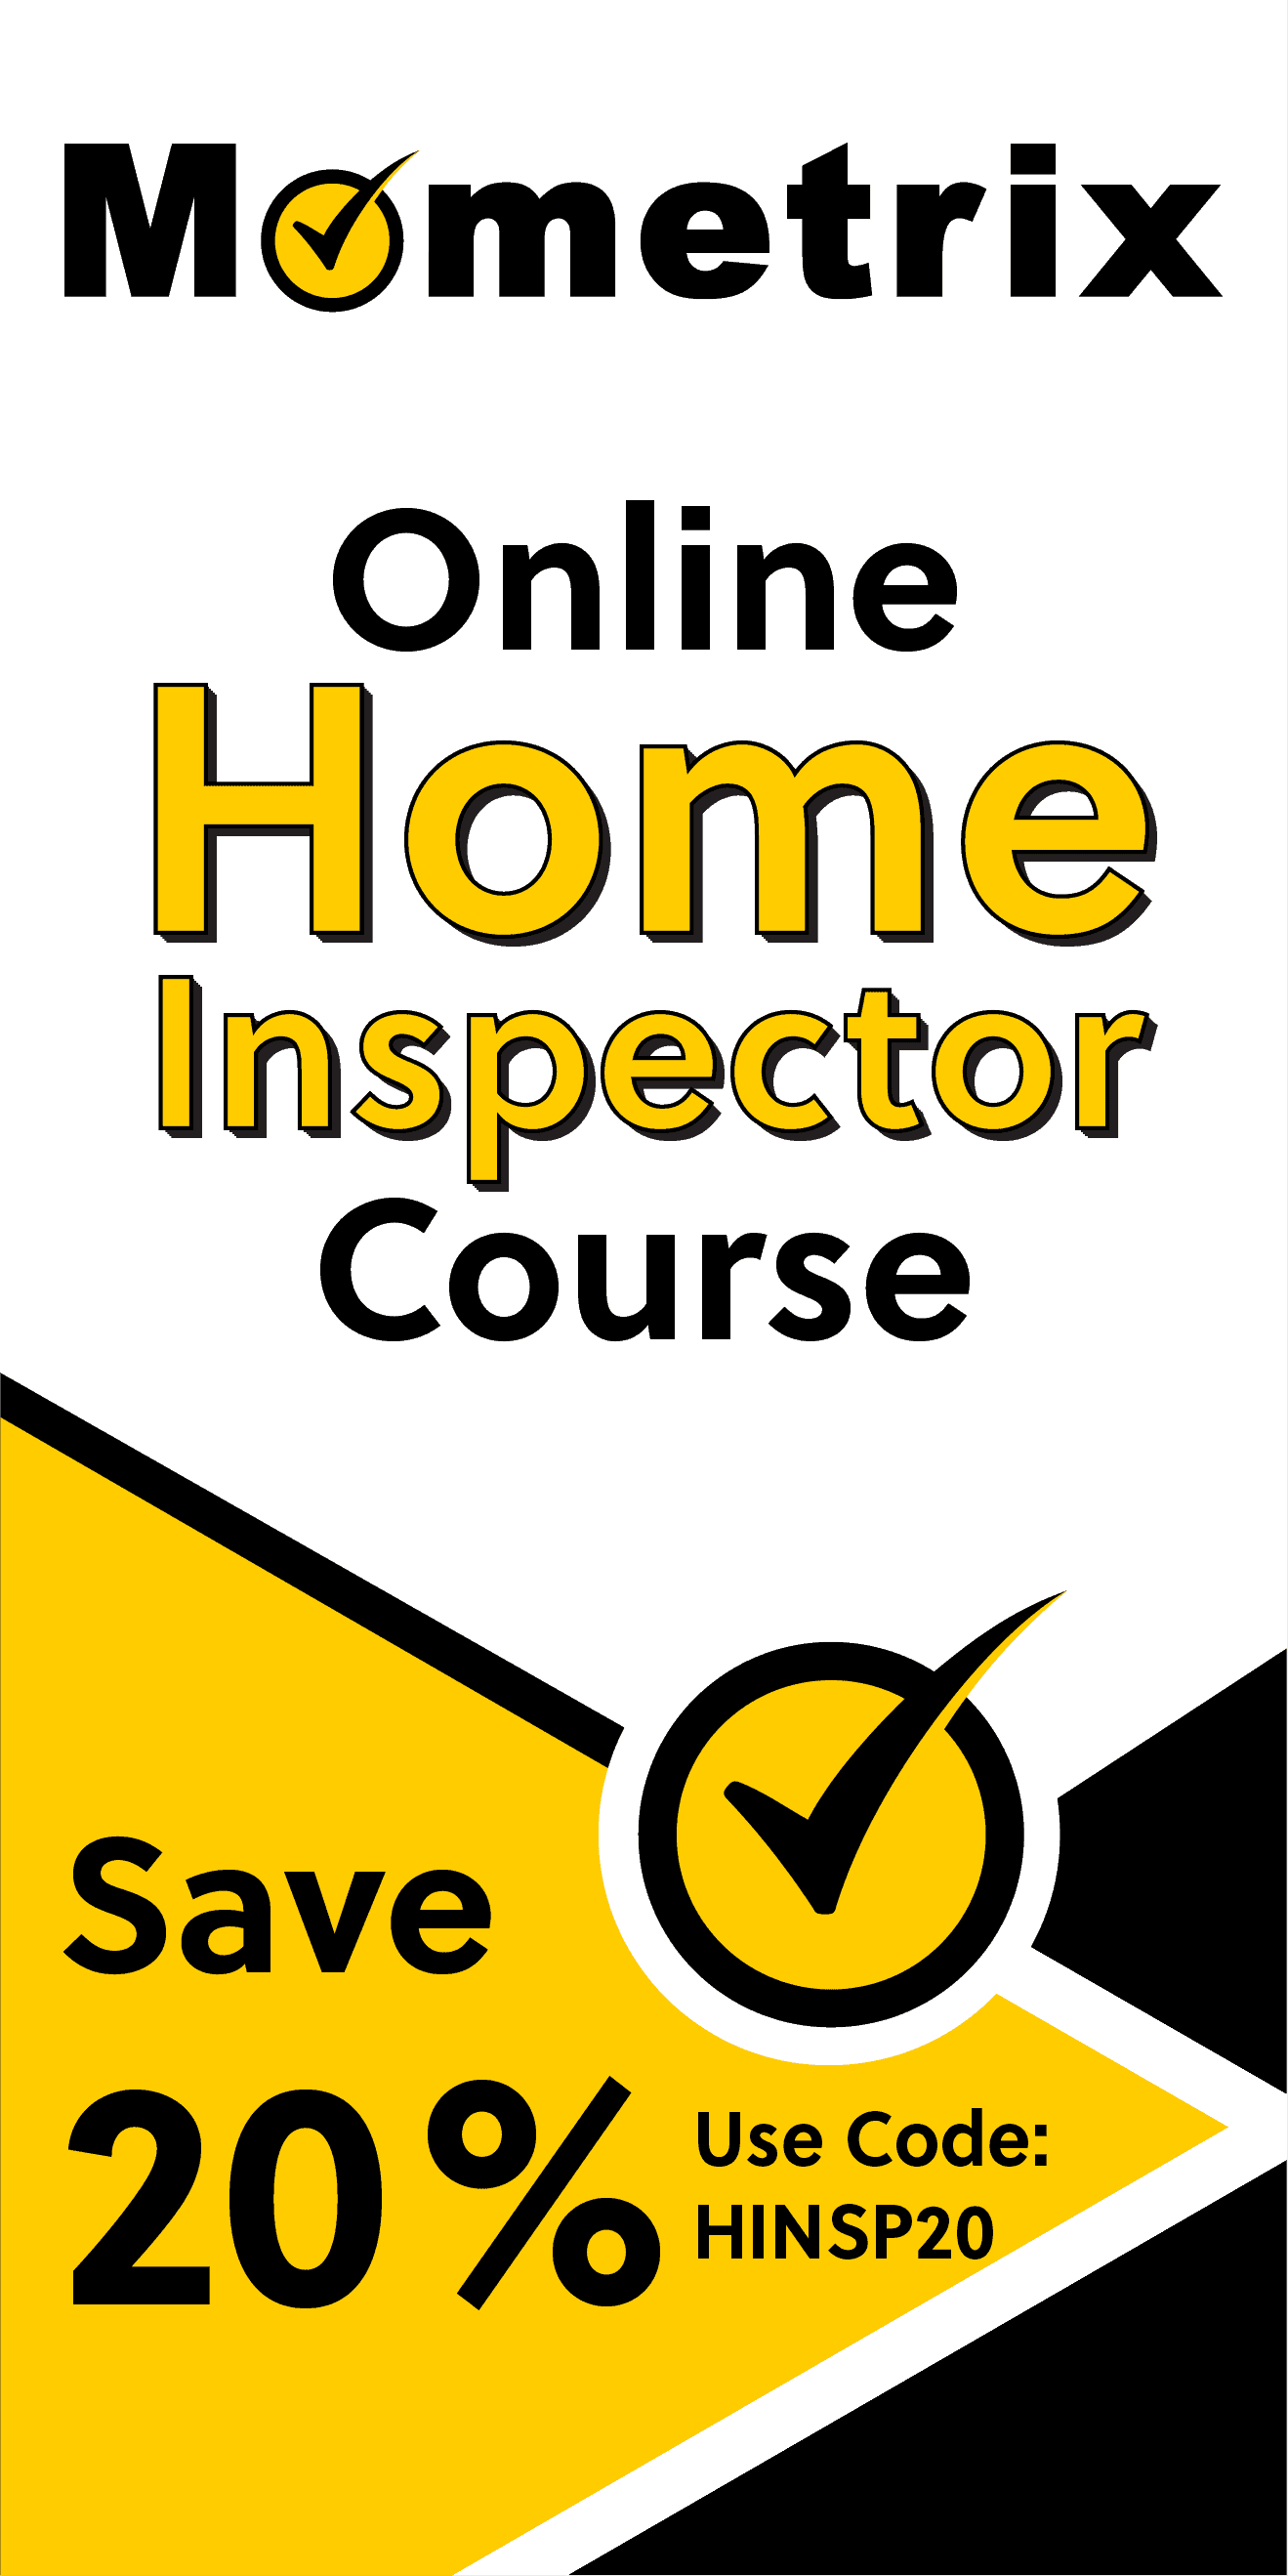 Click here for 20% off of Mometrix Home Inspector online course. Use code: HINSP20